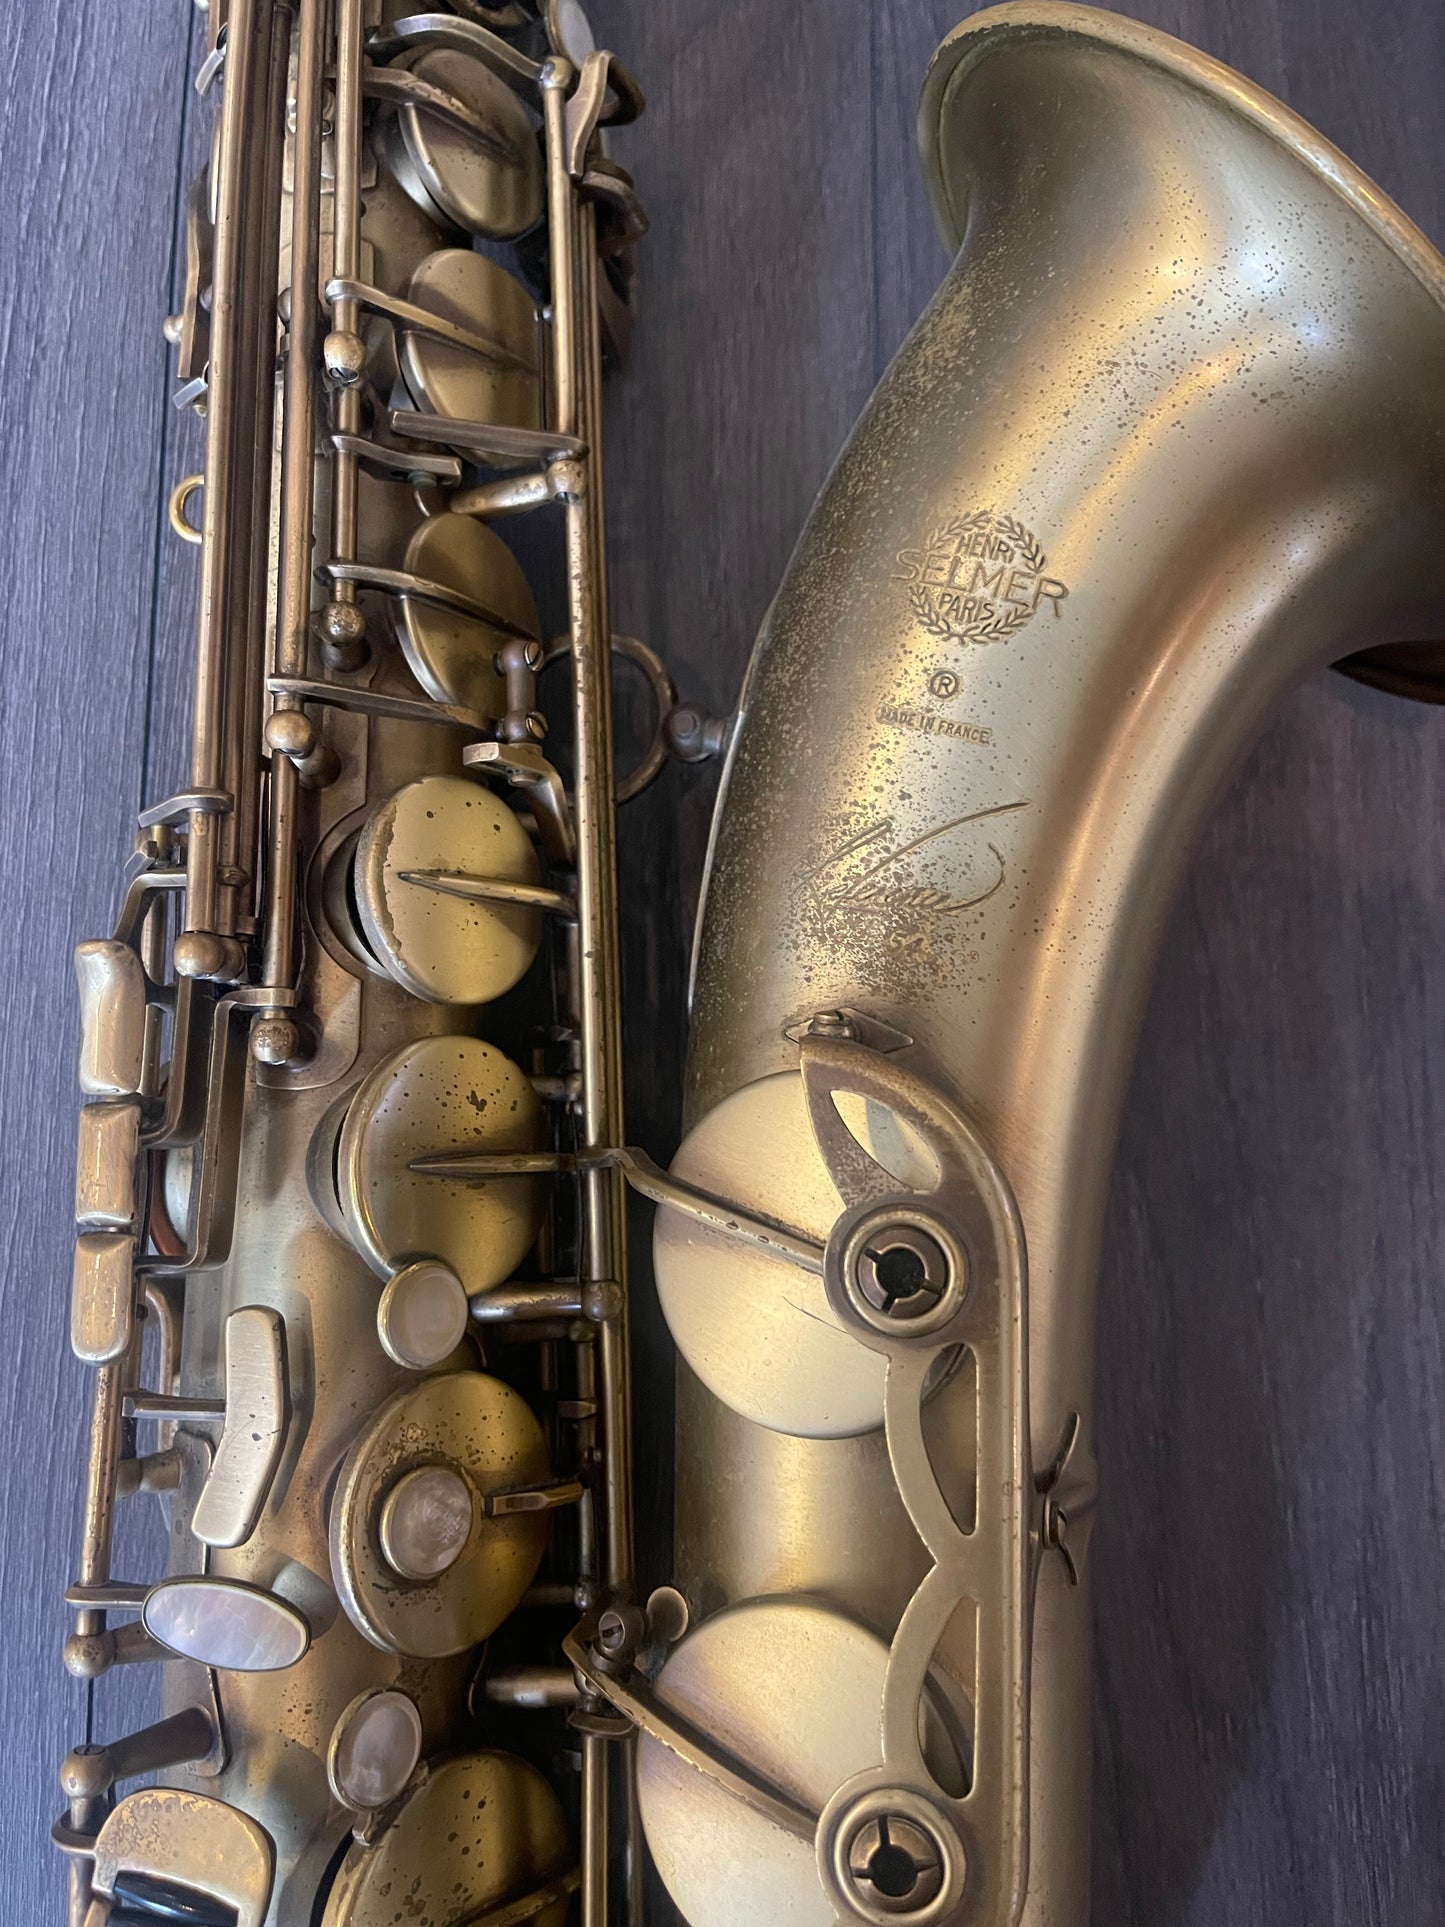 SELMER PARIS REFERENCE 54 TENOR SAXOPHONE - VINTAGE FINISH (Pre owned)